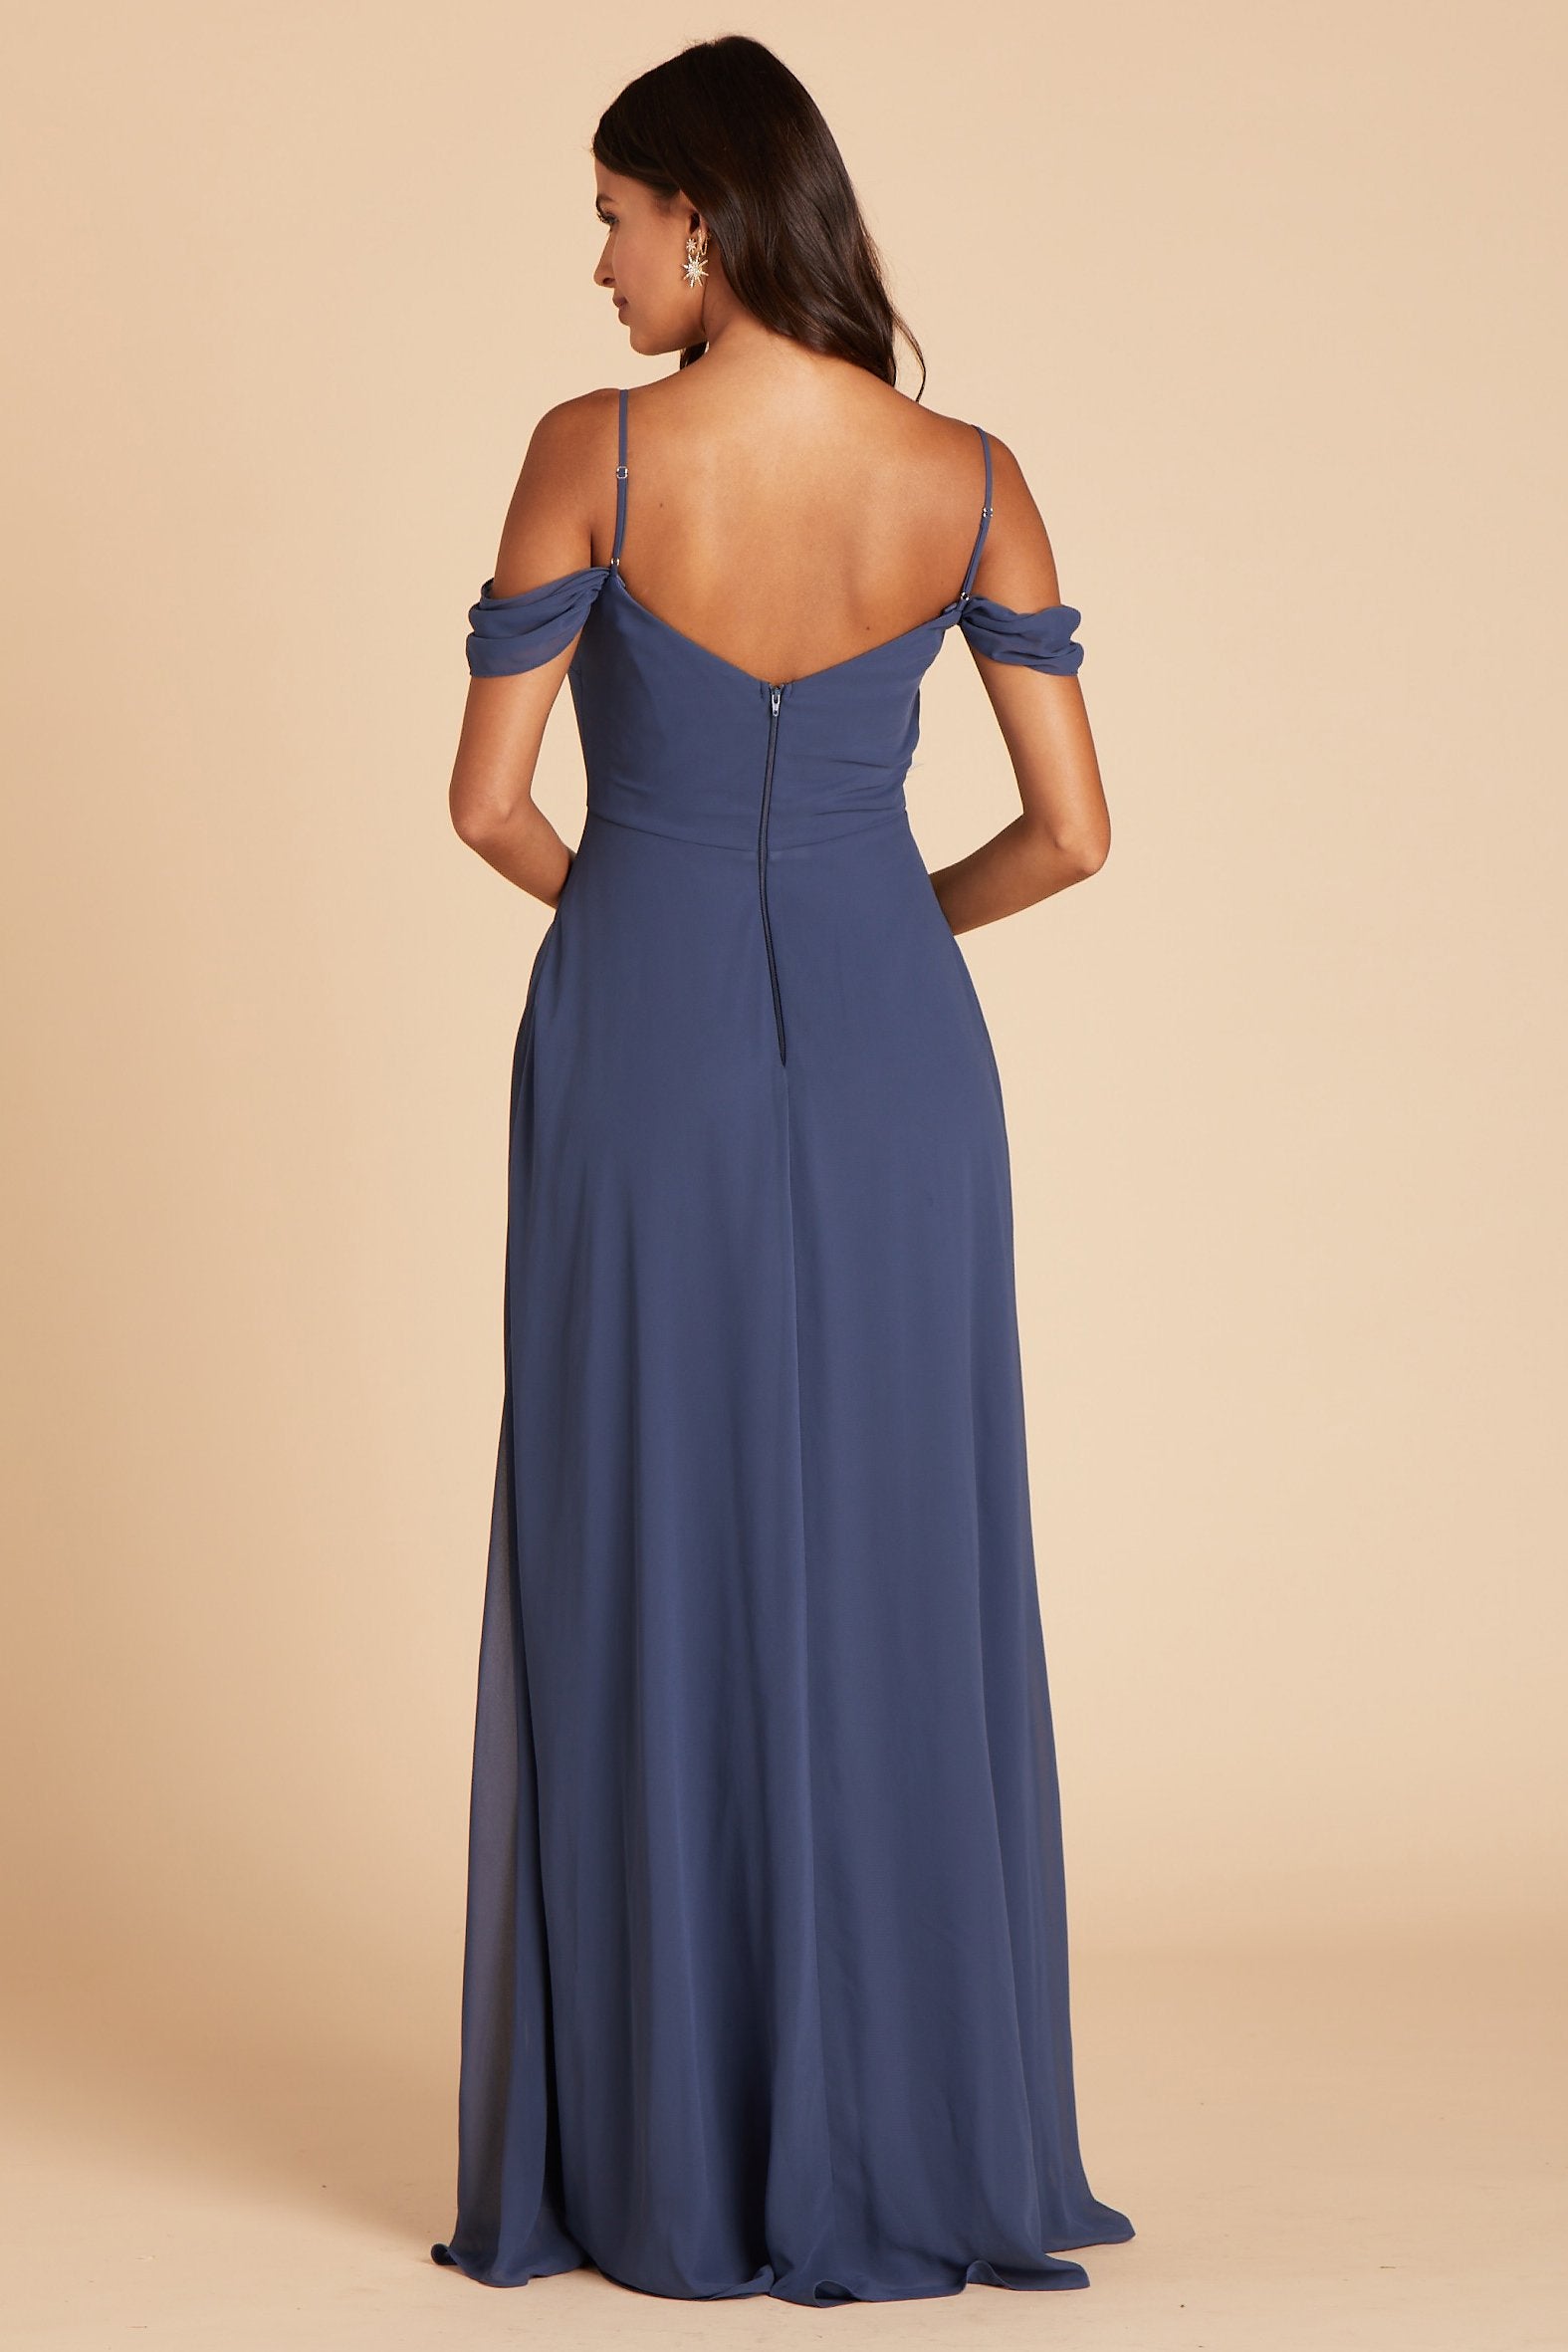 Devin convertible bridesmaids dress in slate blue chiffon by Birdy Grey, back view